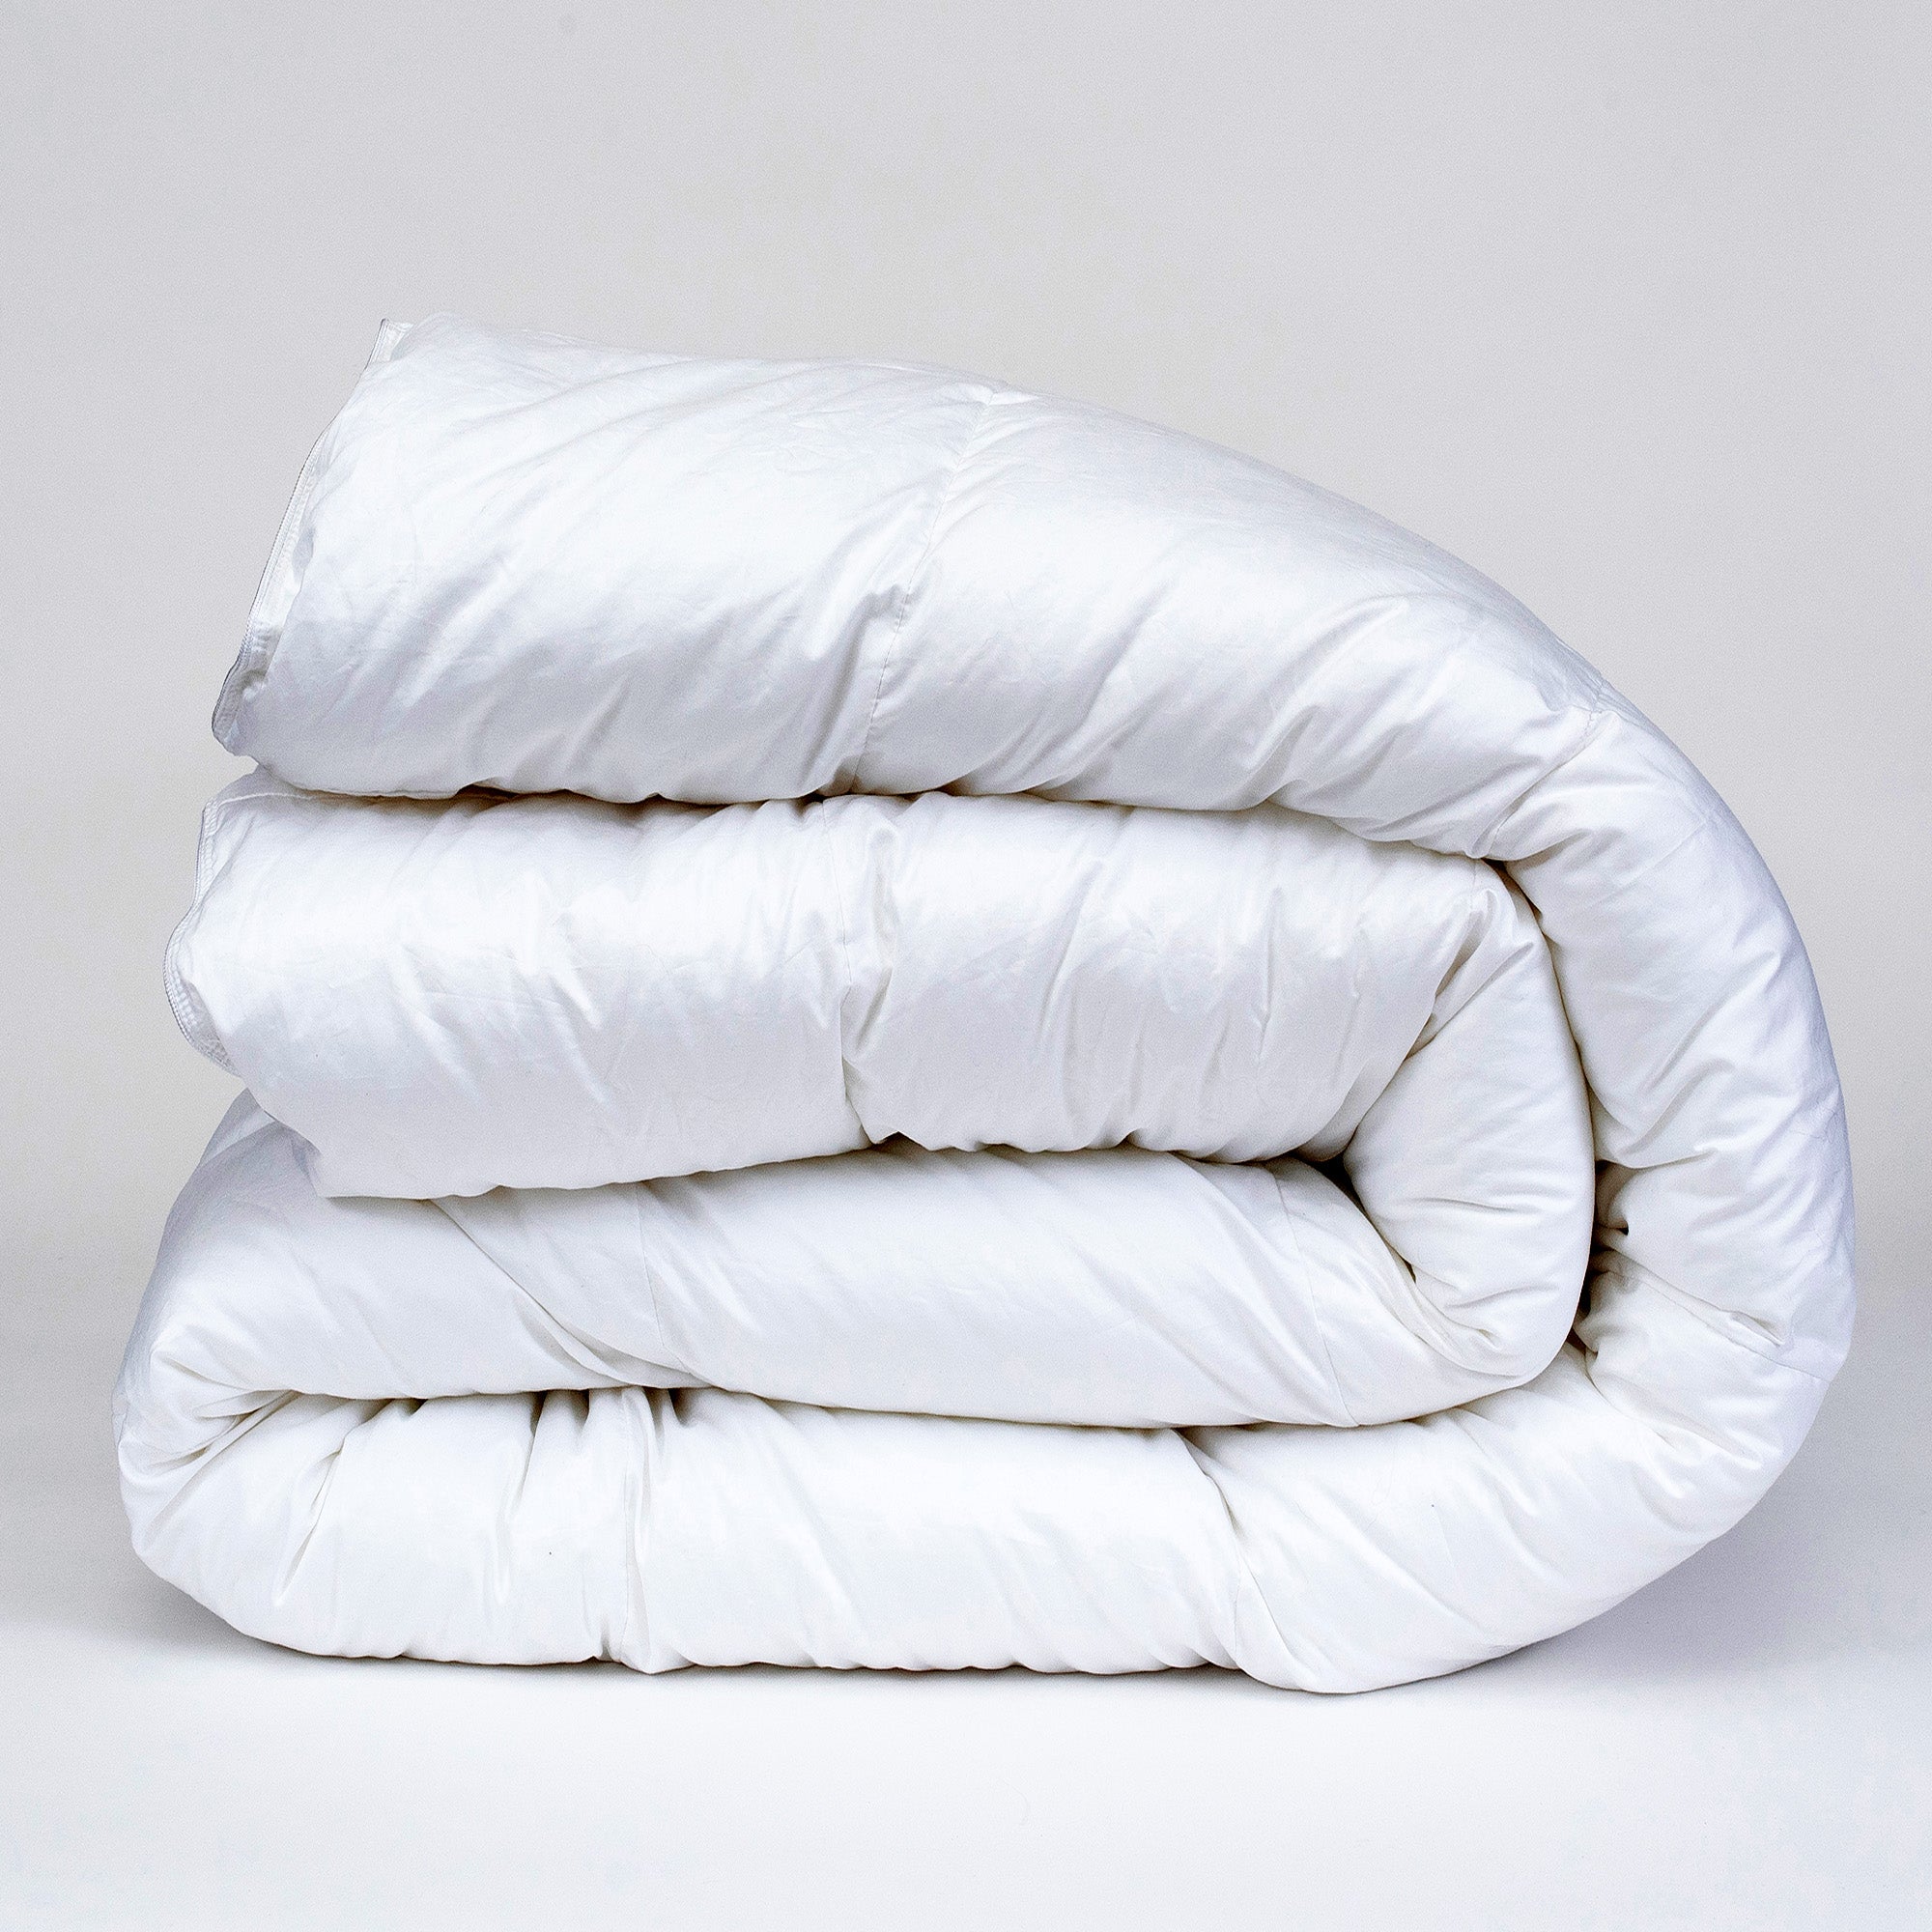 Folded Down Comforter Heavy Weight - American Blanket Company